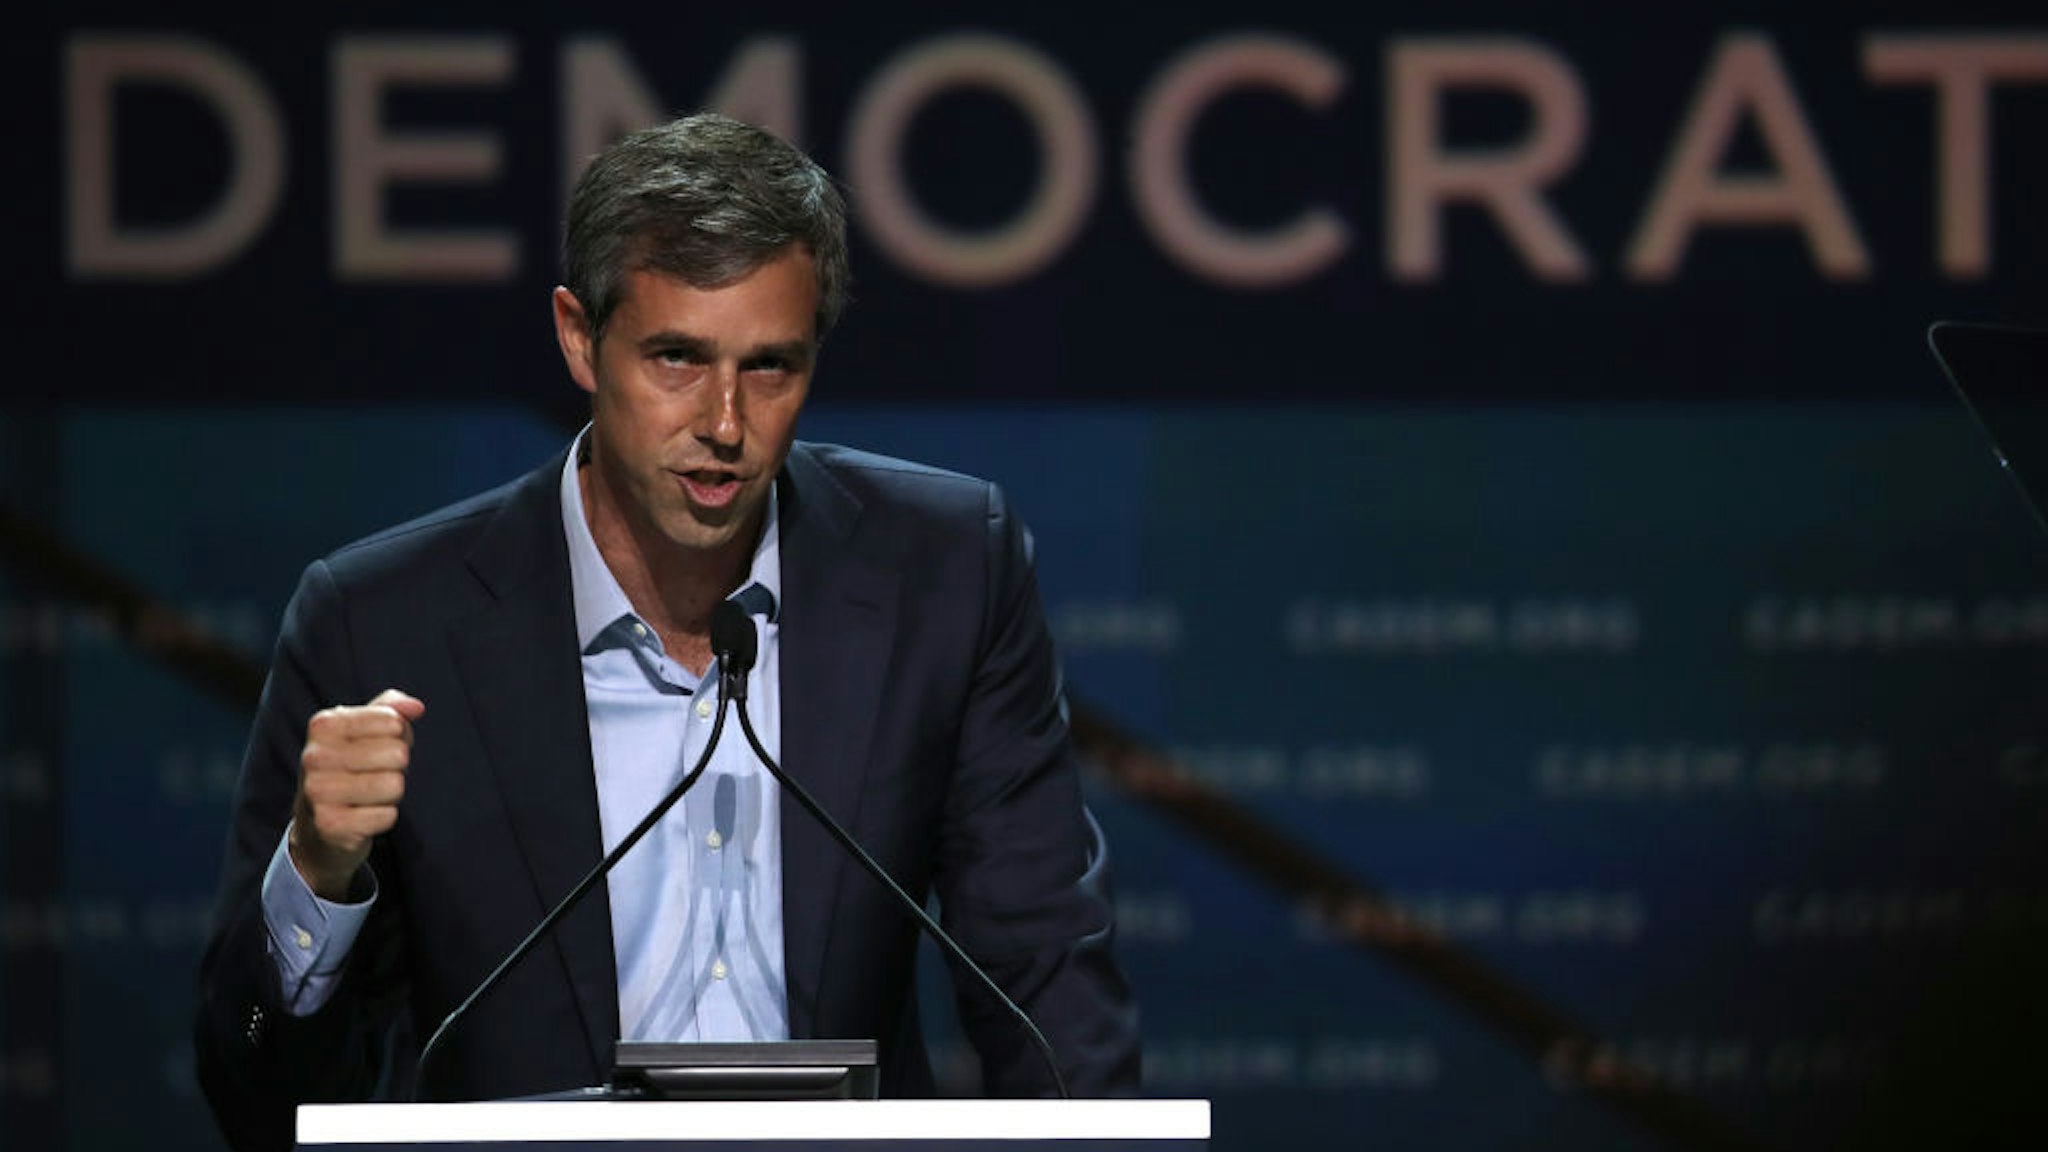 Democratic presidential hopeful former U.S. Rep. Beto O'Rourke (D-TX) speaks during the California Democrats 2019 State Convention at the Moscone Center on June 01, 2019 in San Francisco, California.